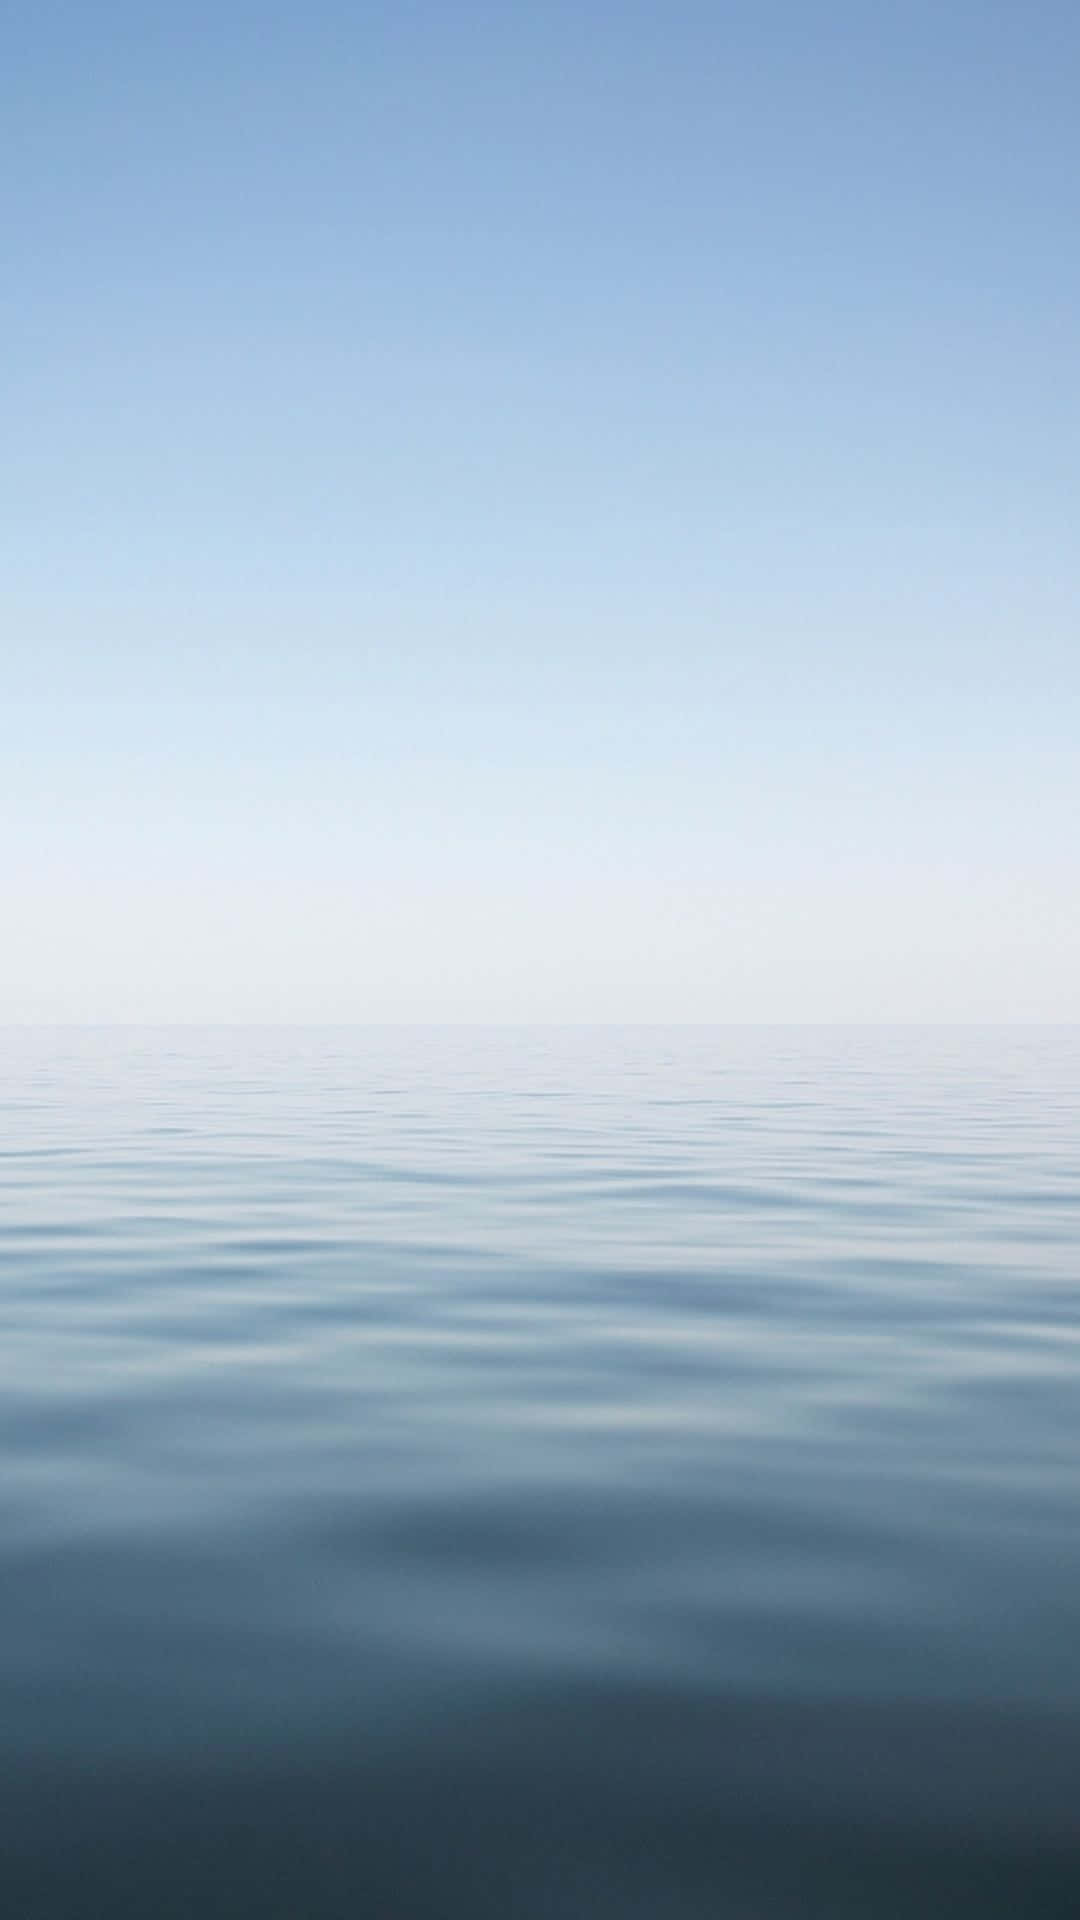 A Blue Ocean With A White Sky Wallpaper